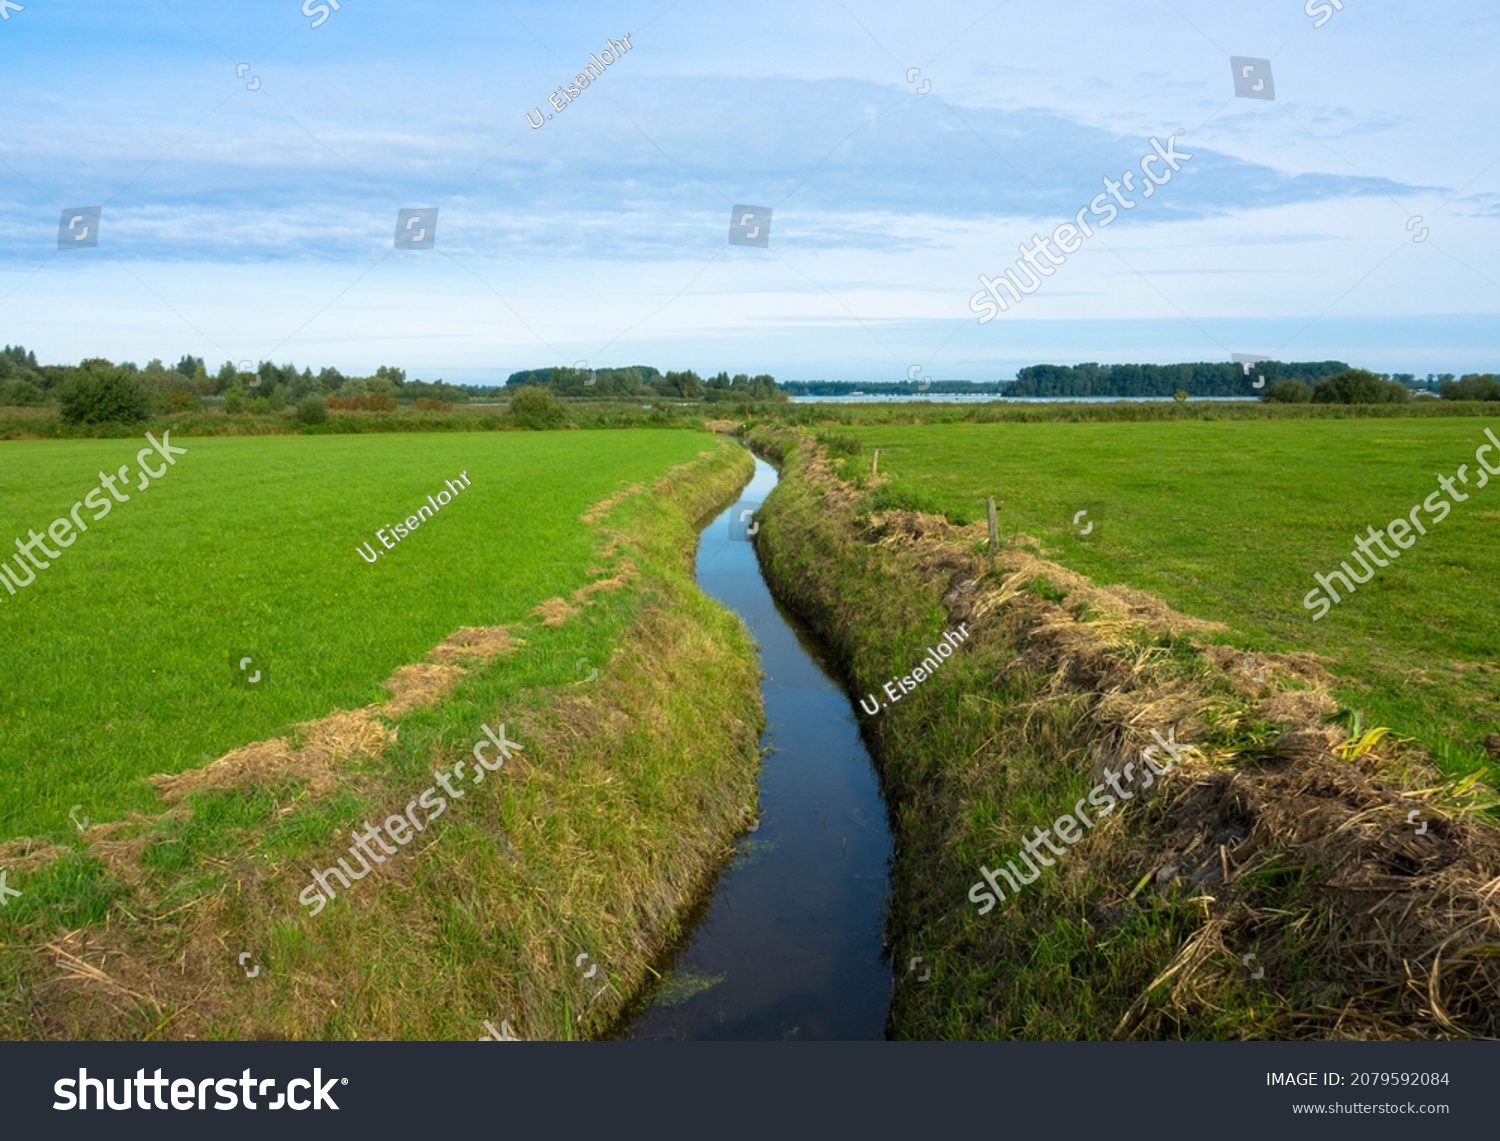 Dutch countryside landscape, Typical polder and water land, Green meadow on the blue sky. Small canal or ditch on the field, Friesland Netherlands #2079592084